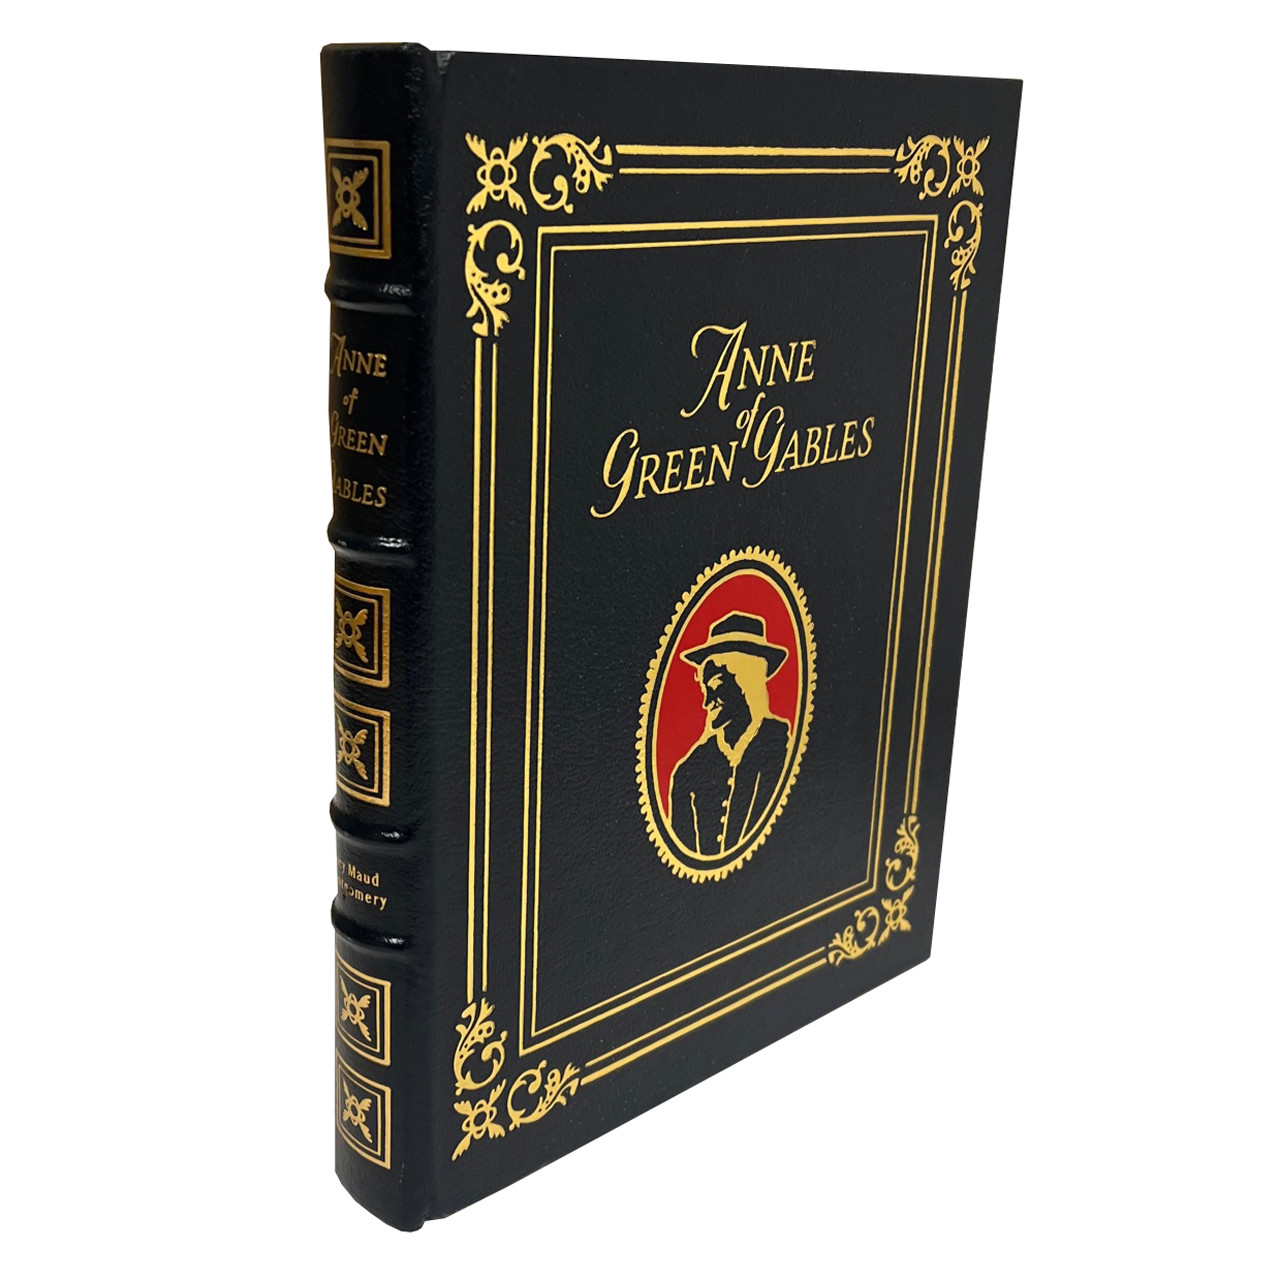 Lucy Maud Montgomery "Anne of Green Gables" Leather Bound Collector's Edition, Deluxe Limited Edition